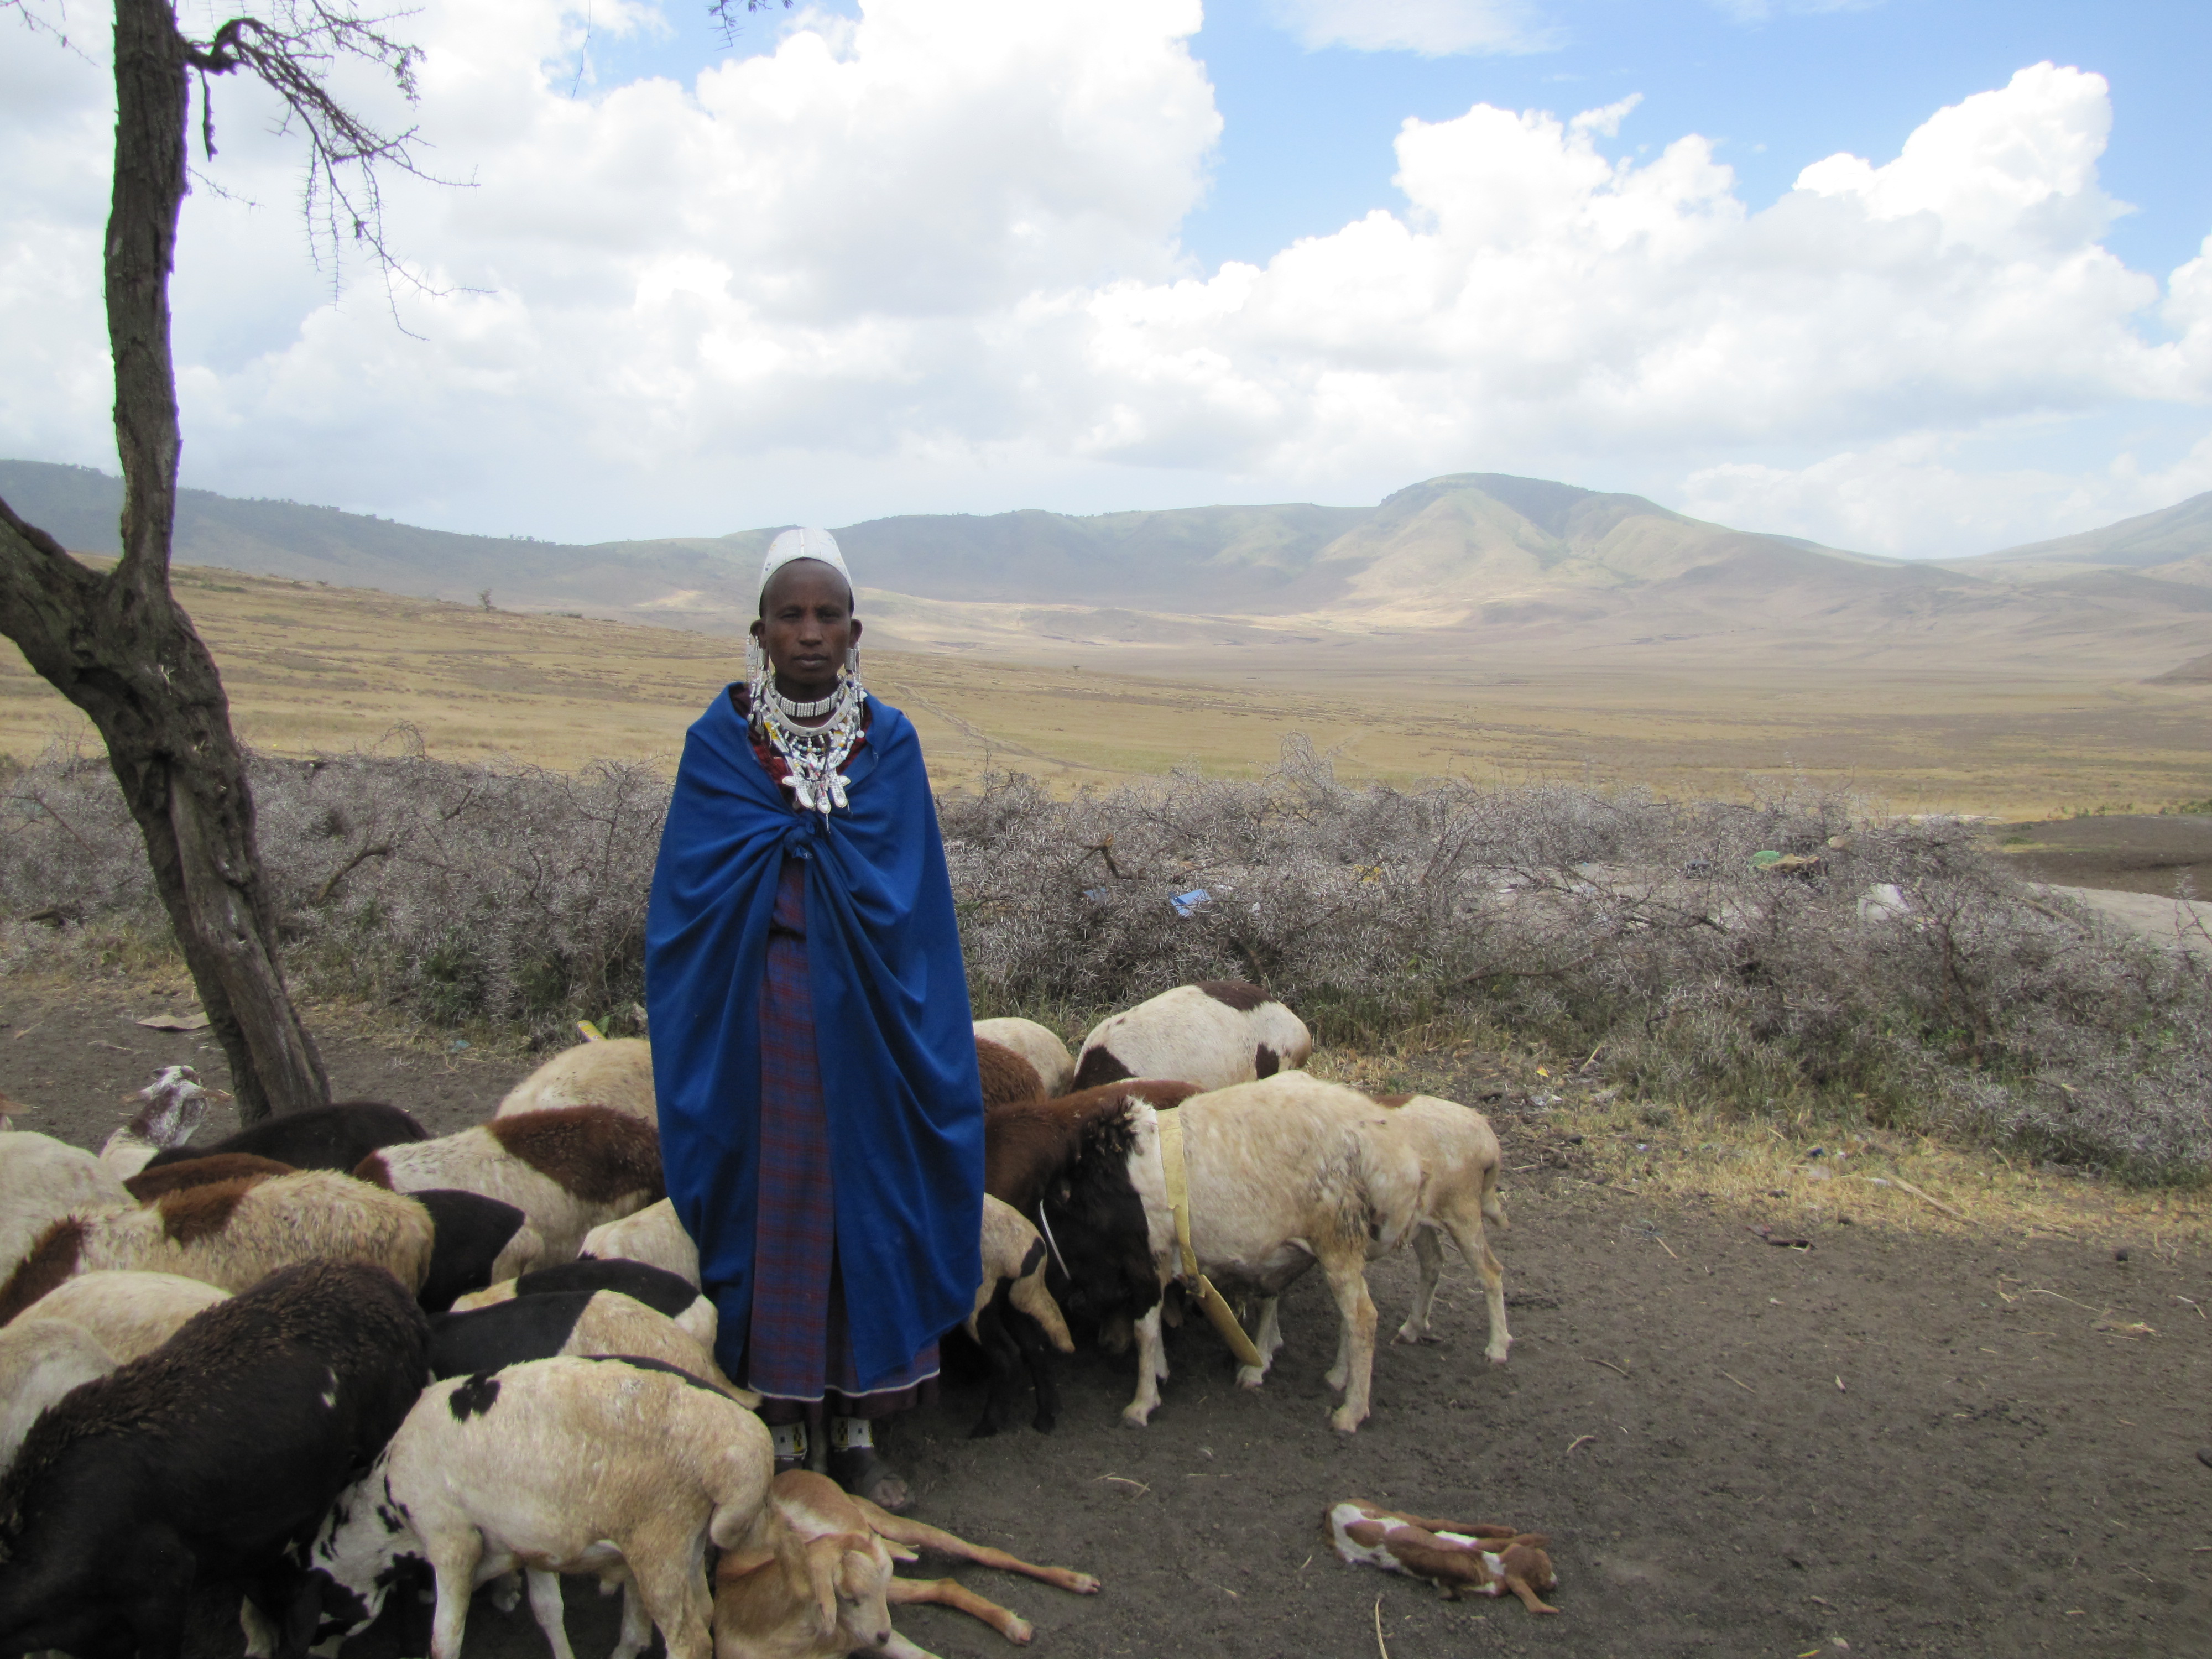 A woman in a bright blue cape, white jewelry, and a white cap with livestock in a mountainous setting.